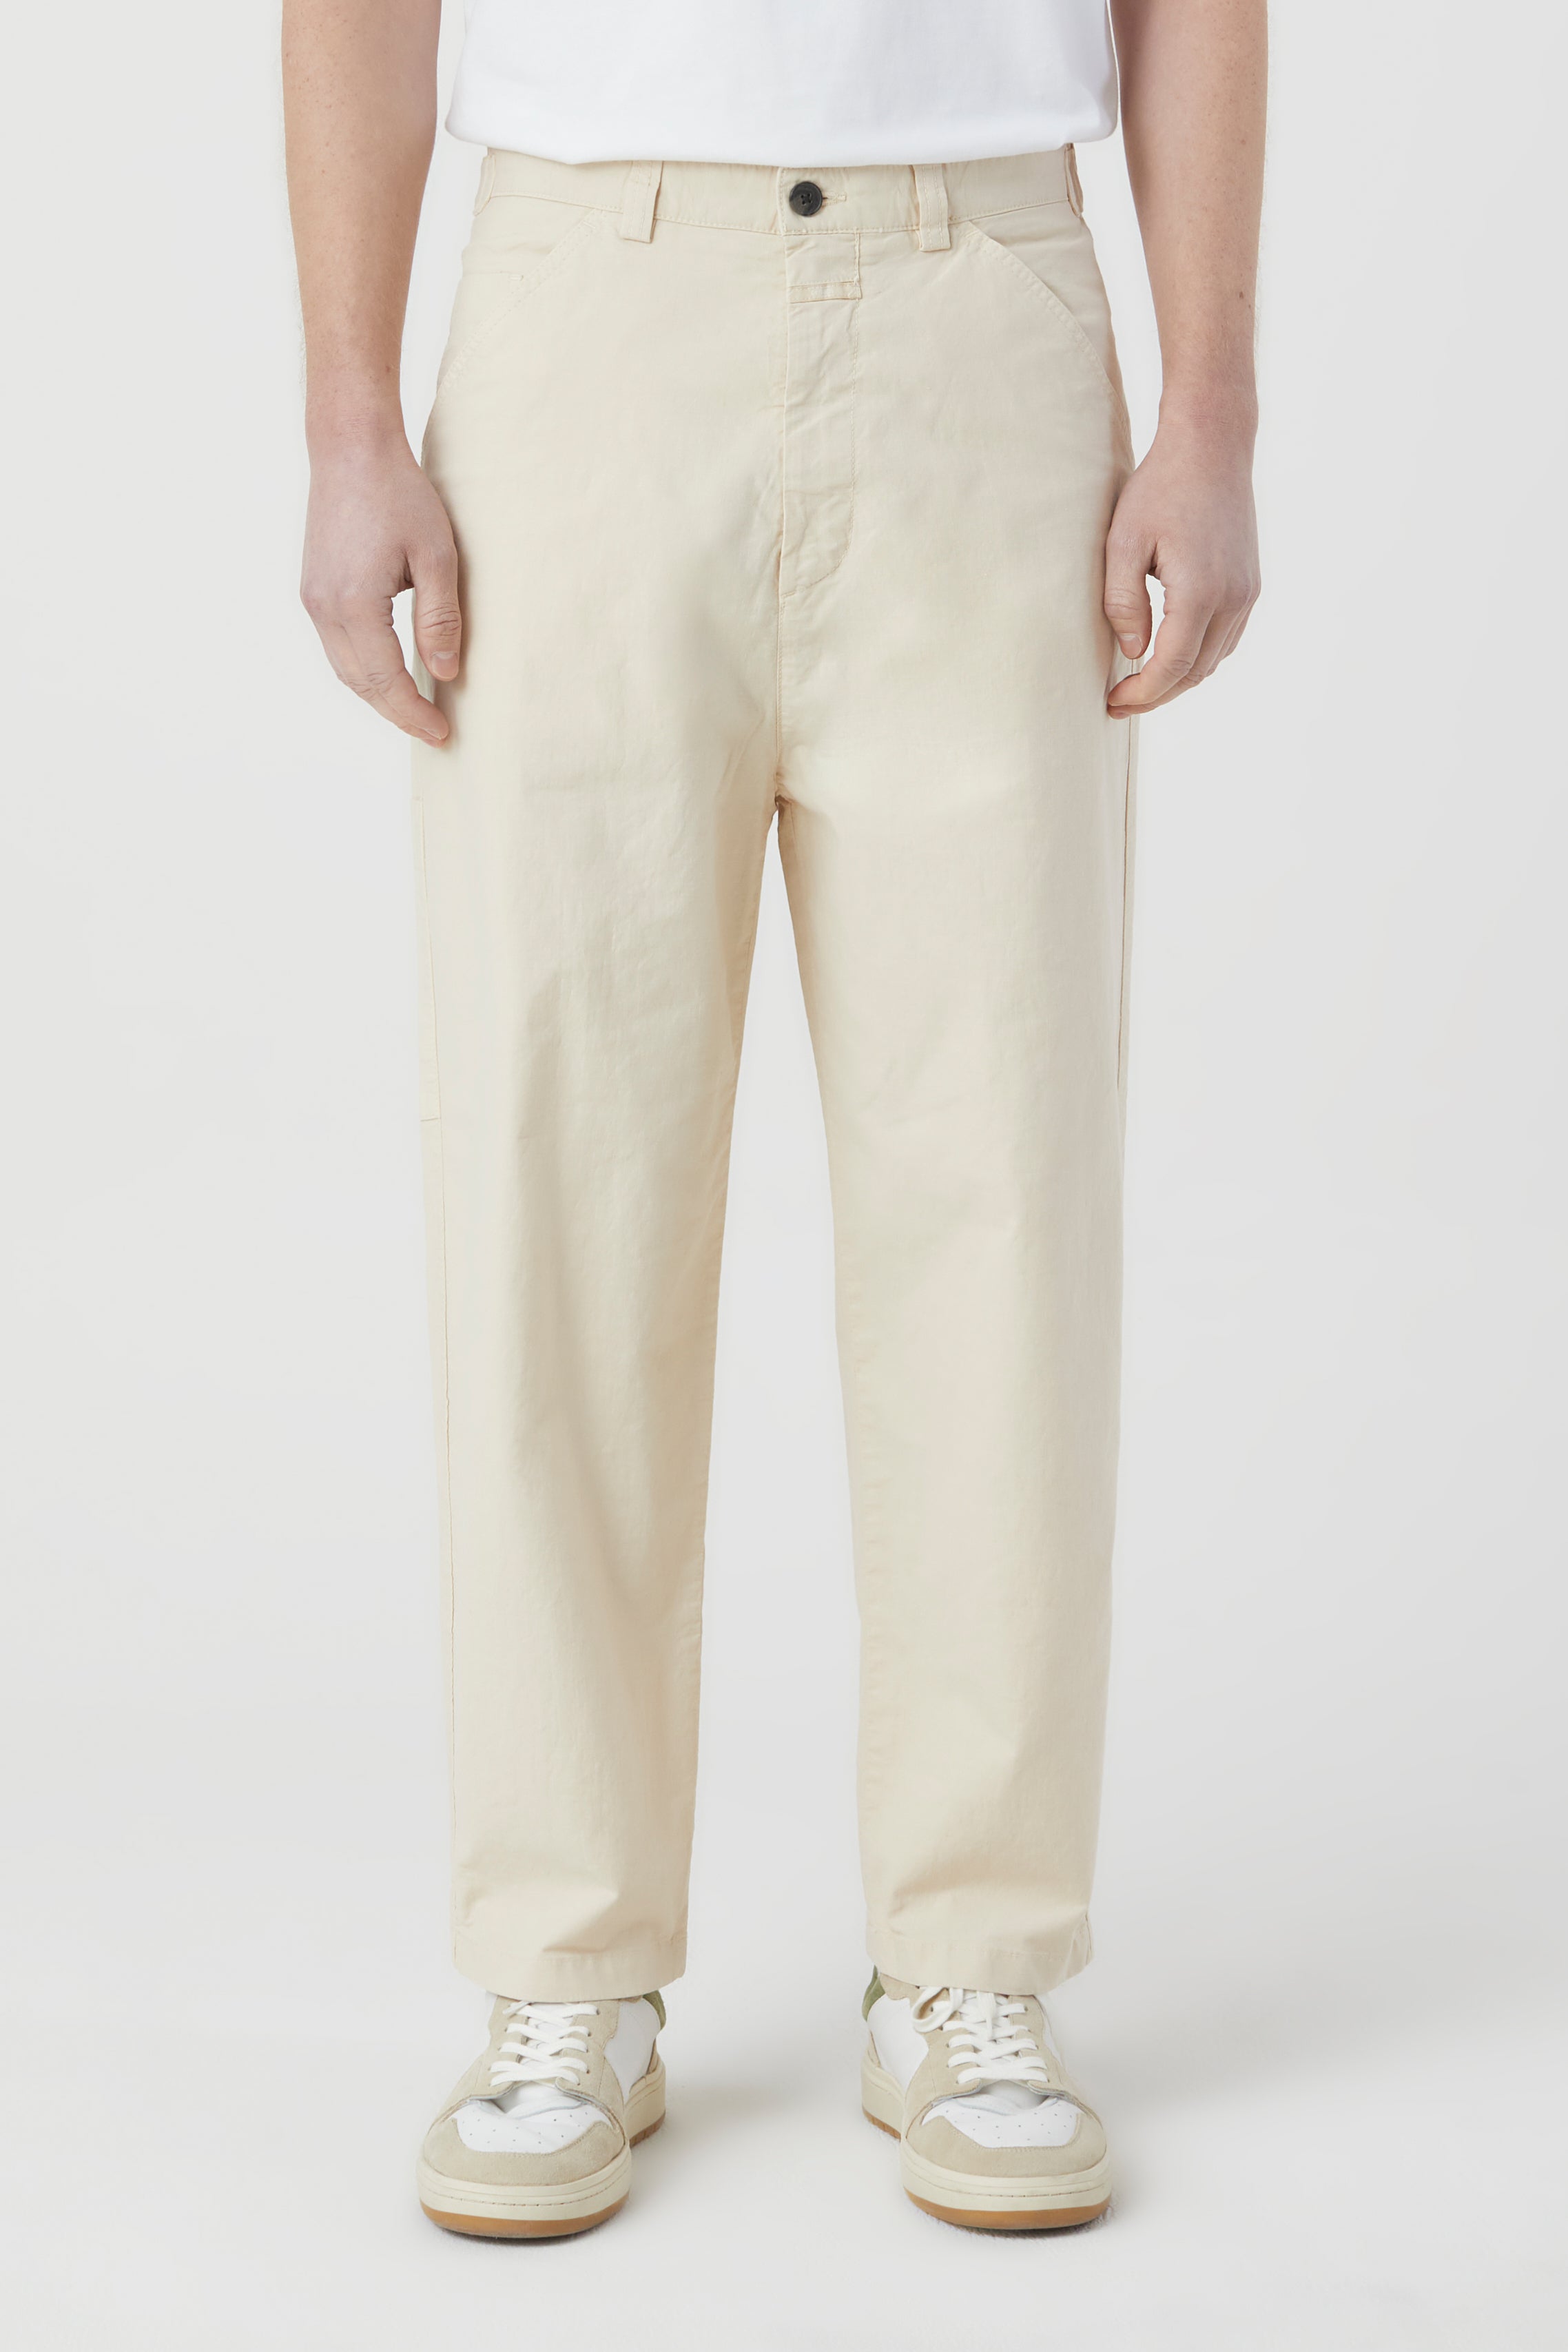 STYLE NAME DOVER TAPERED PANTS